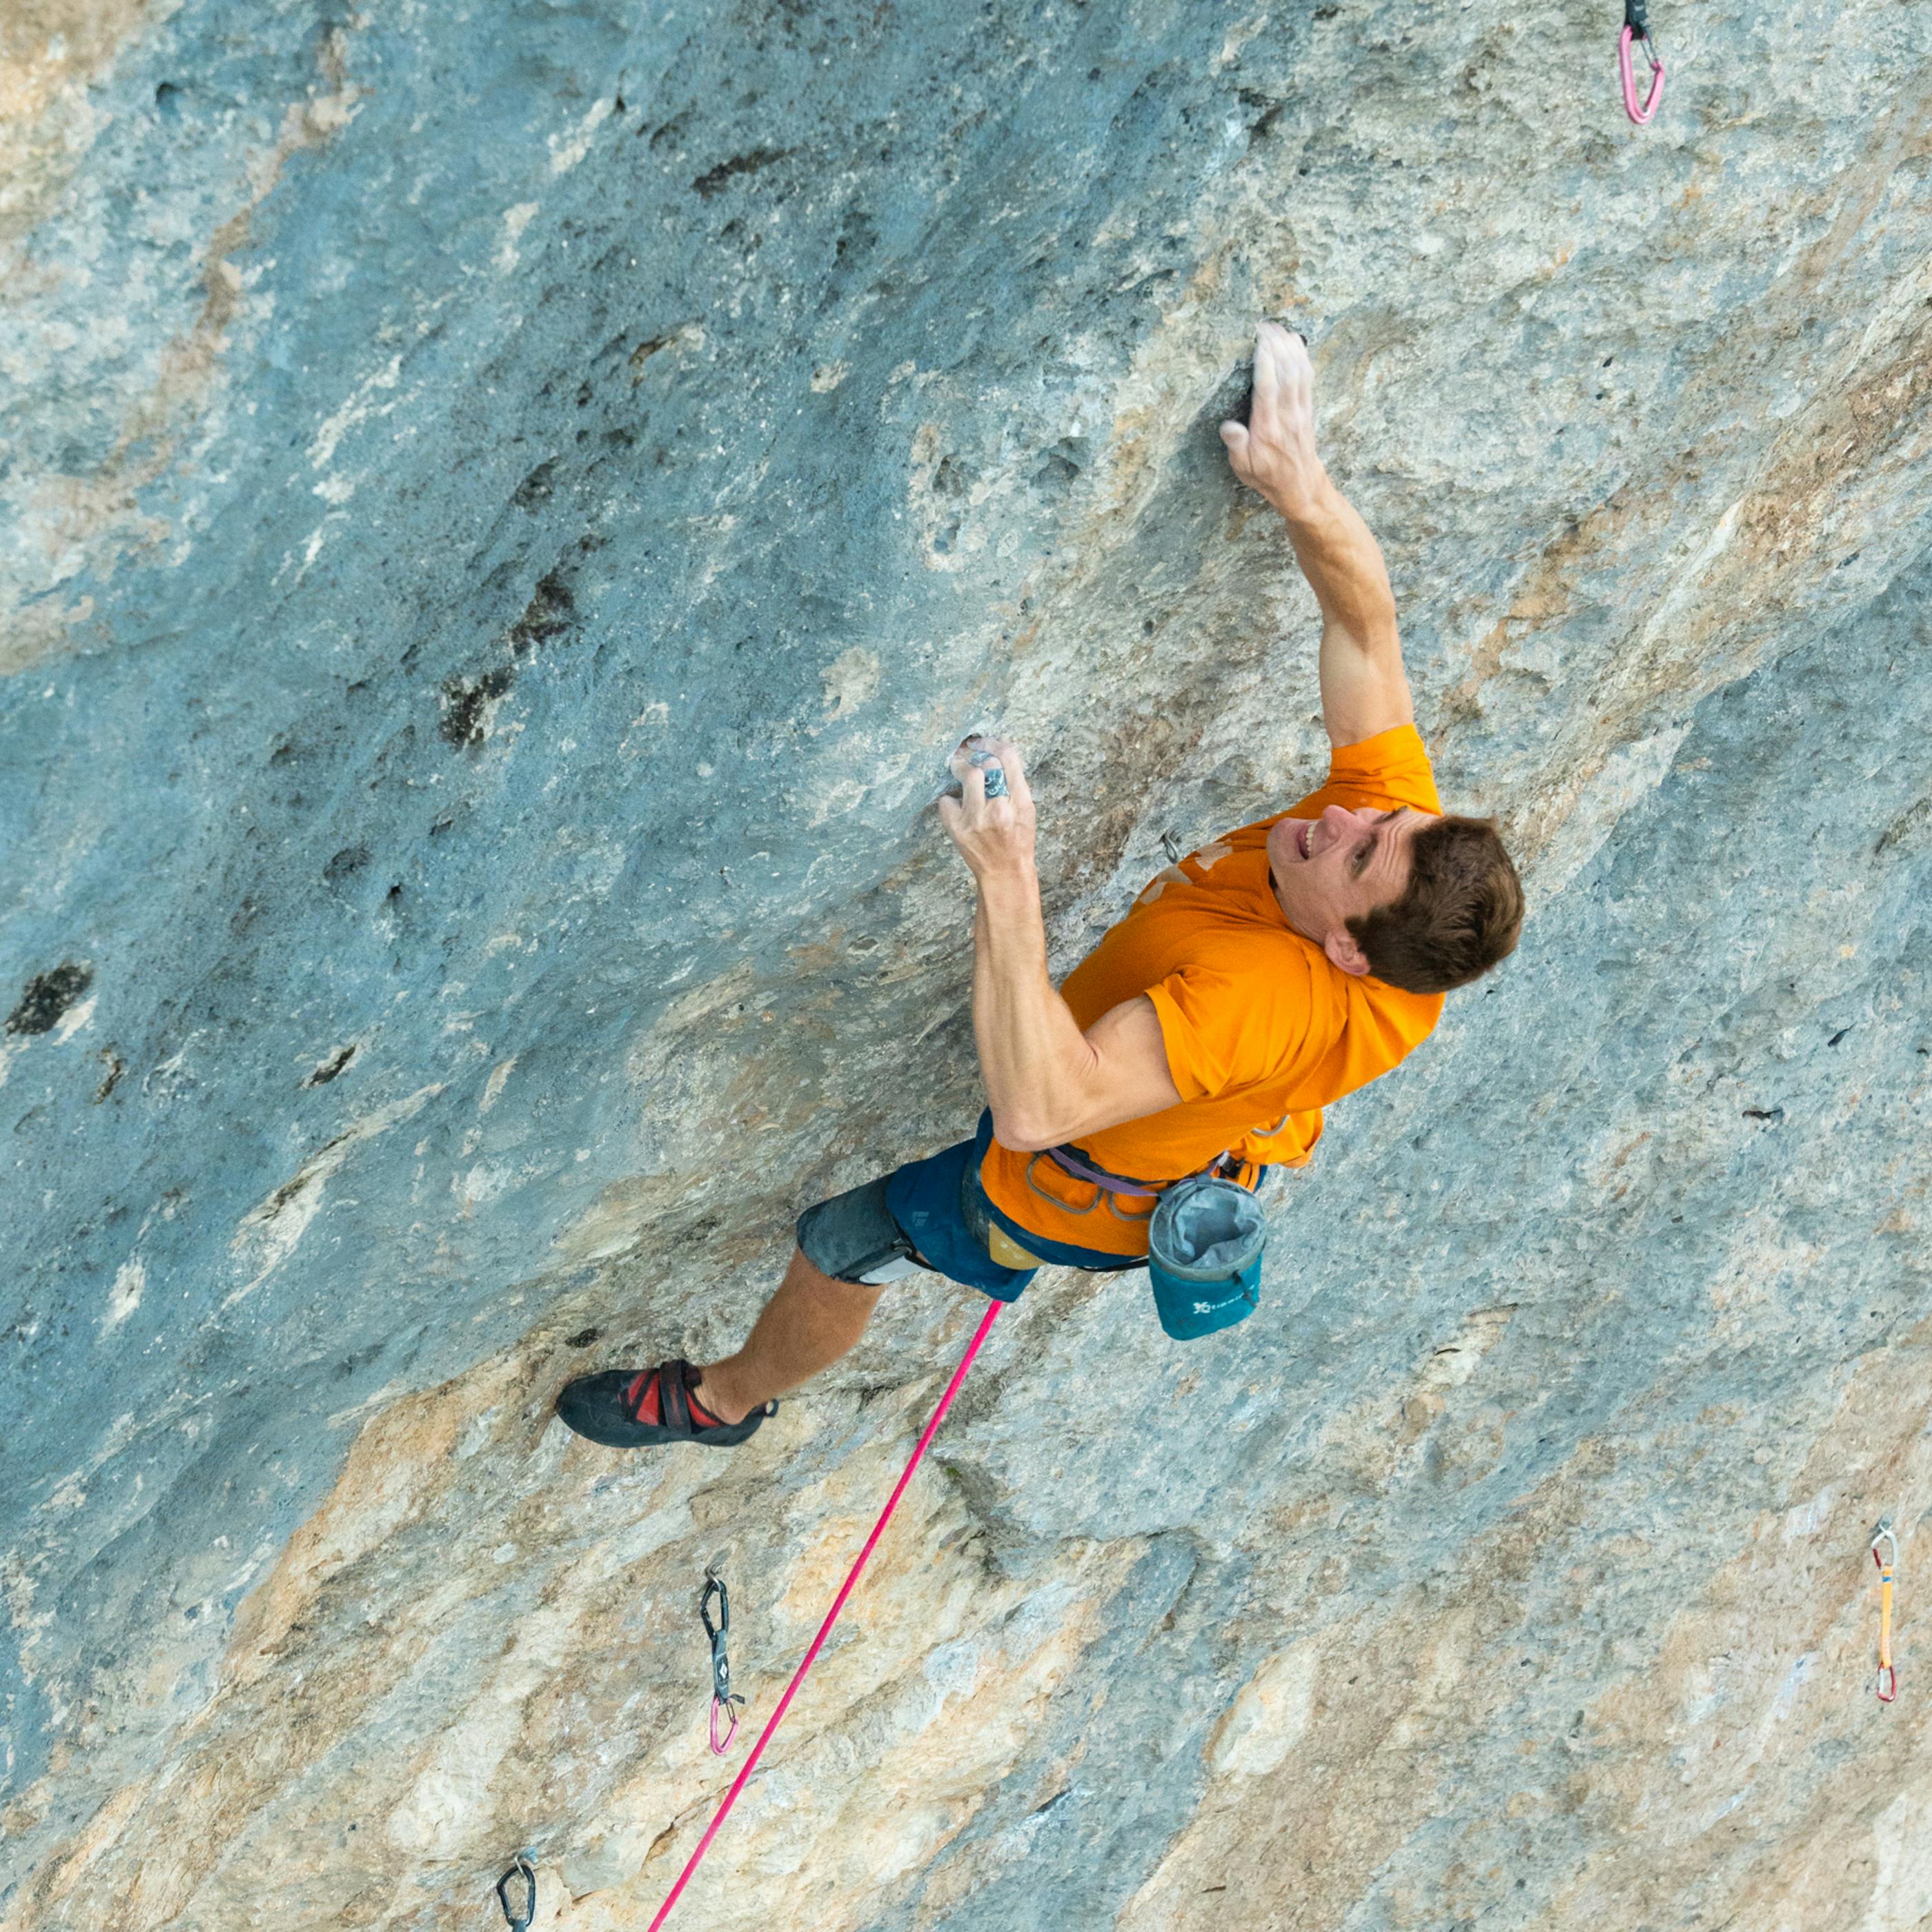 BD athlete Seb Bouin at the main crux of Bibliography